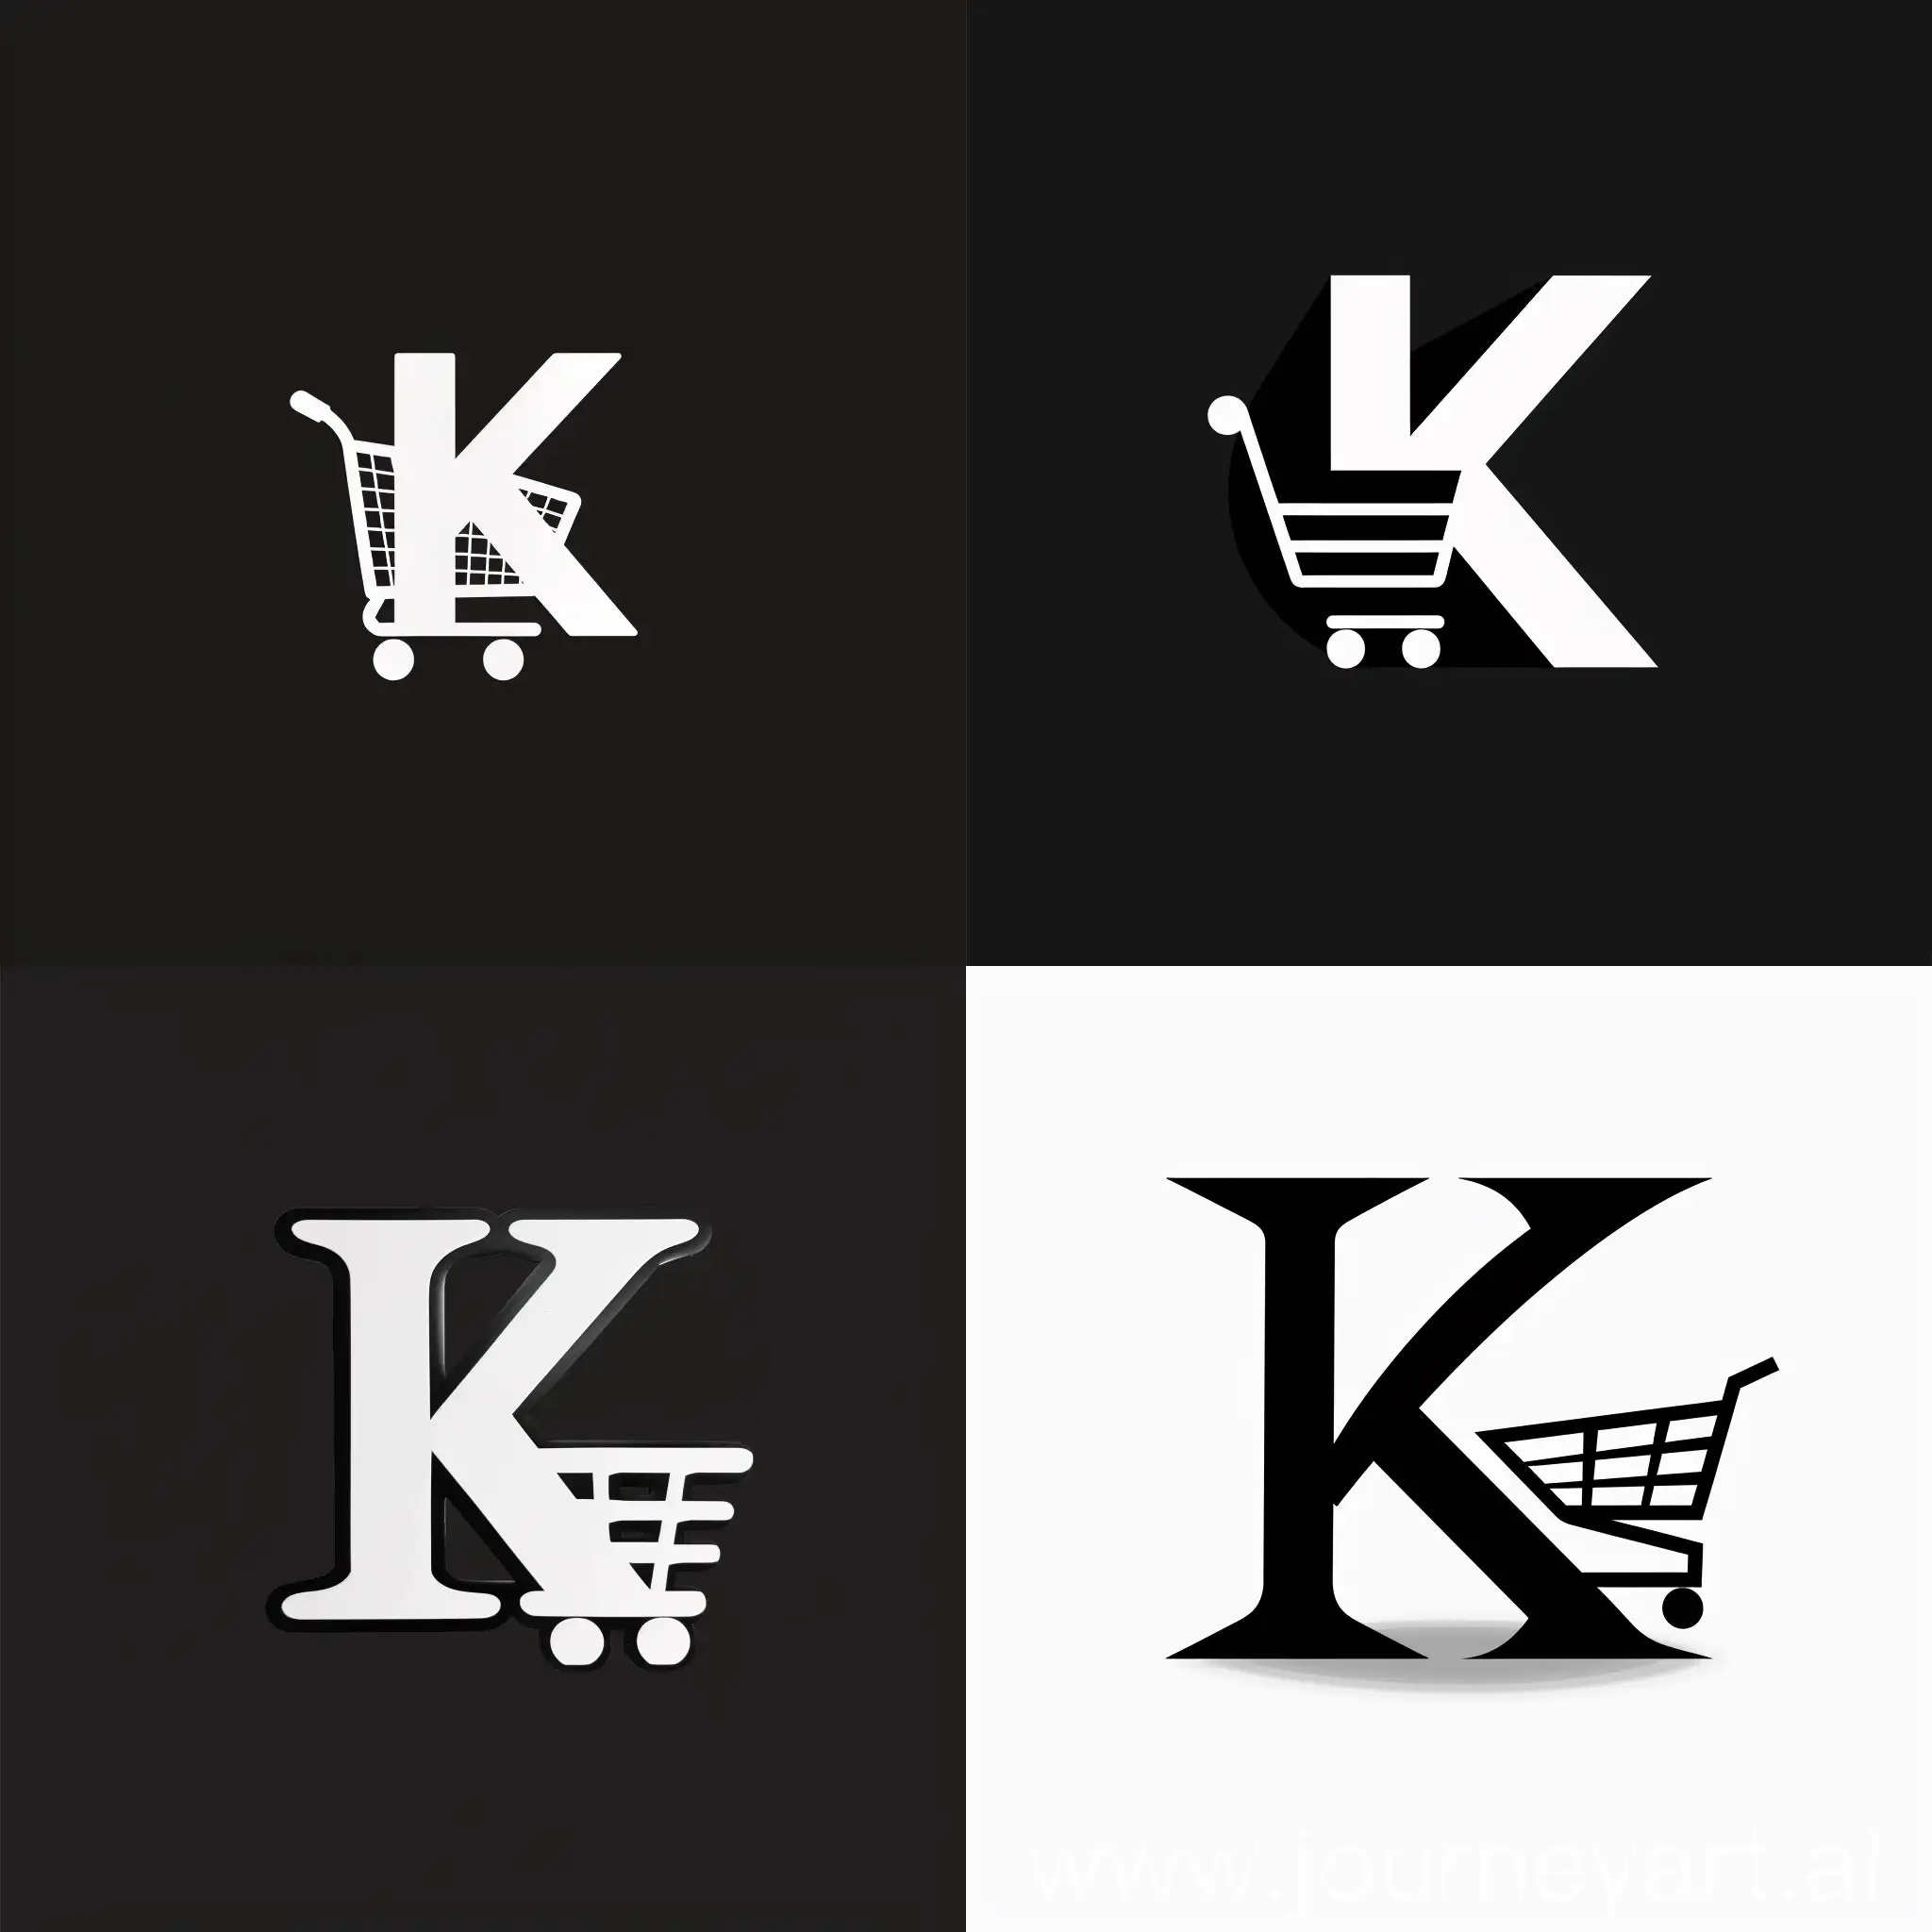 a logo with the letter K and a shopping cart in black and white using negative space